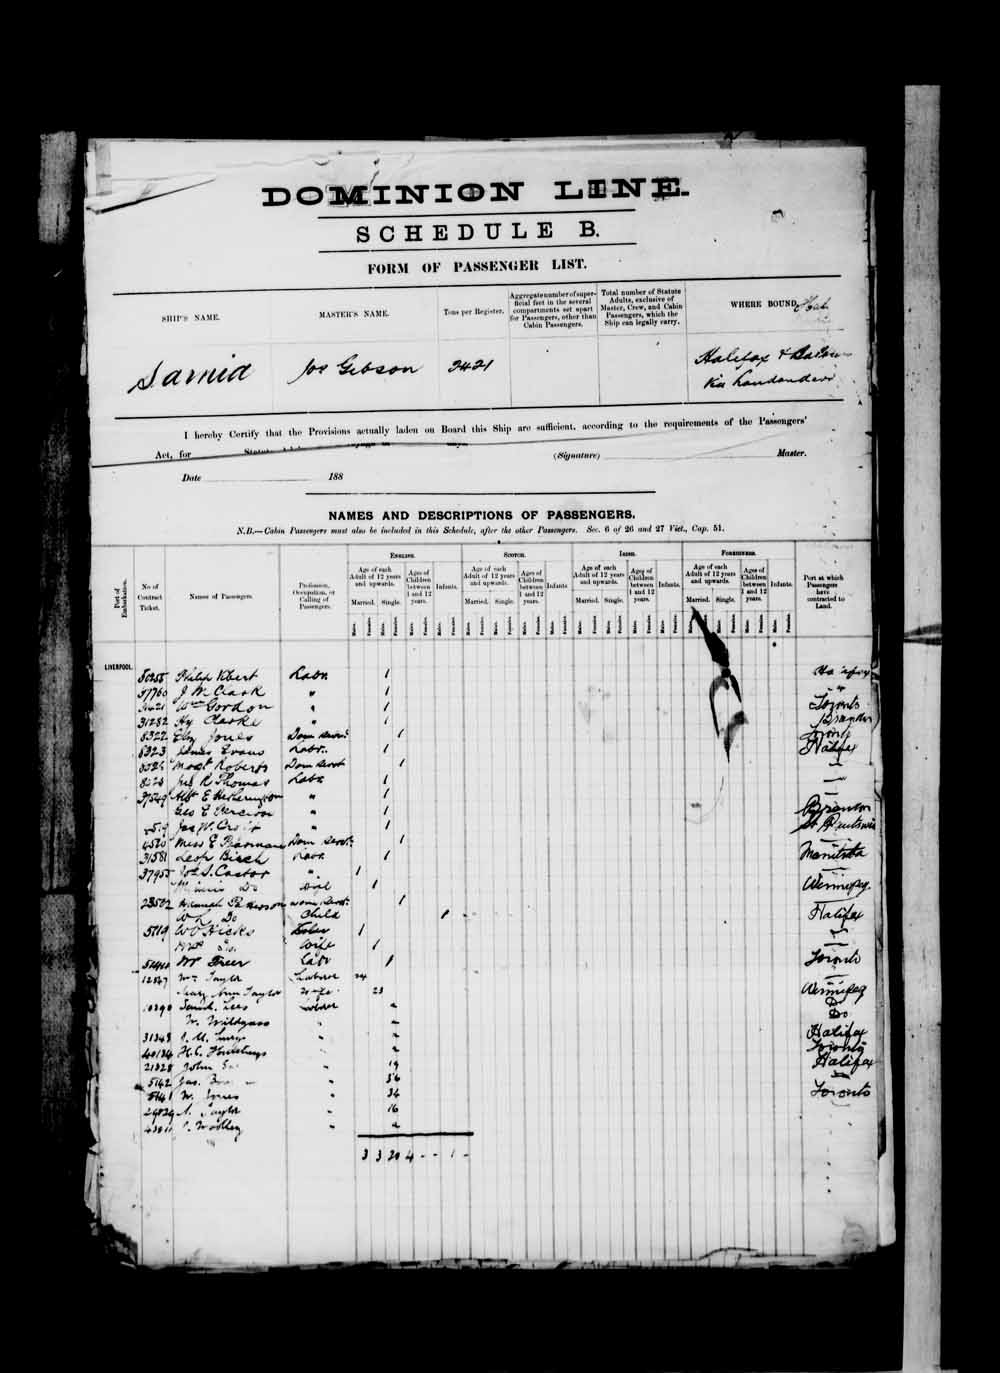 Digitized page of Passenger Lists for Image No.: e003674501